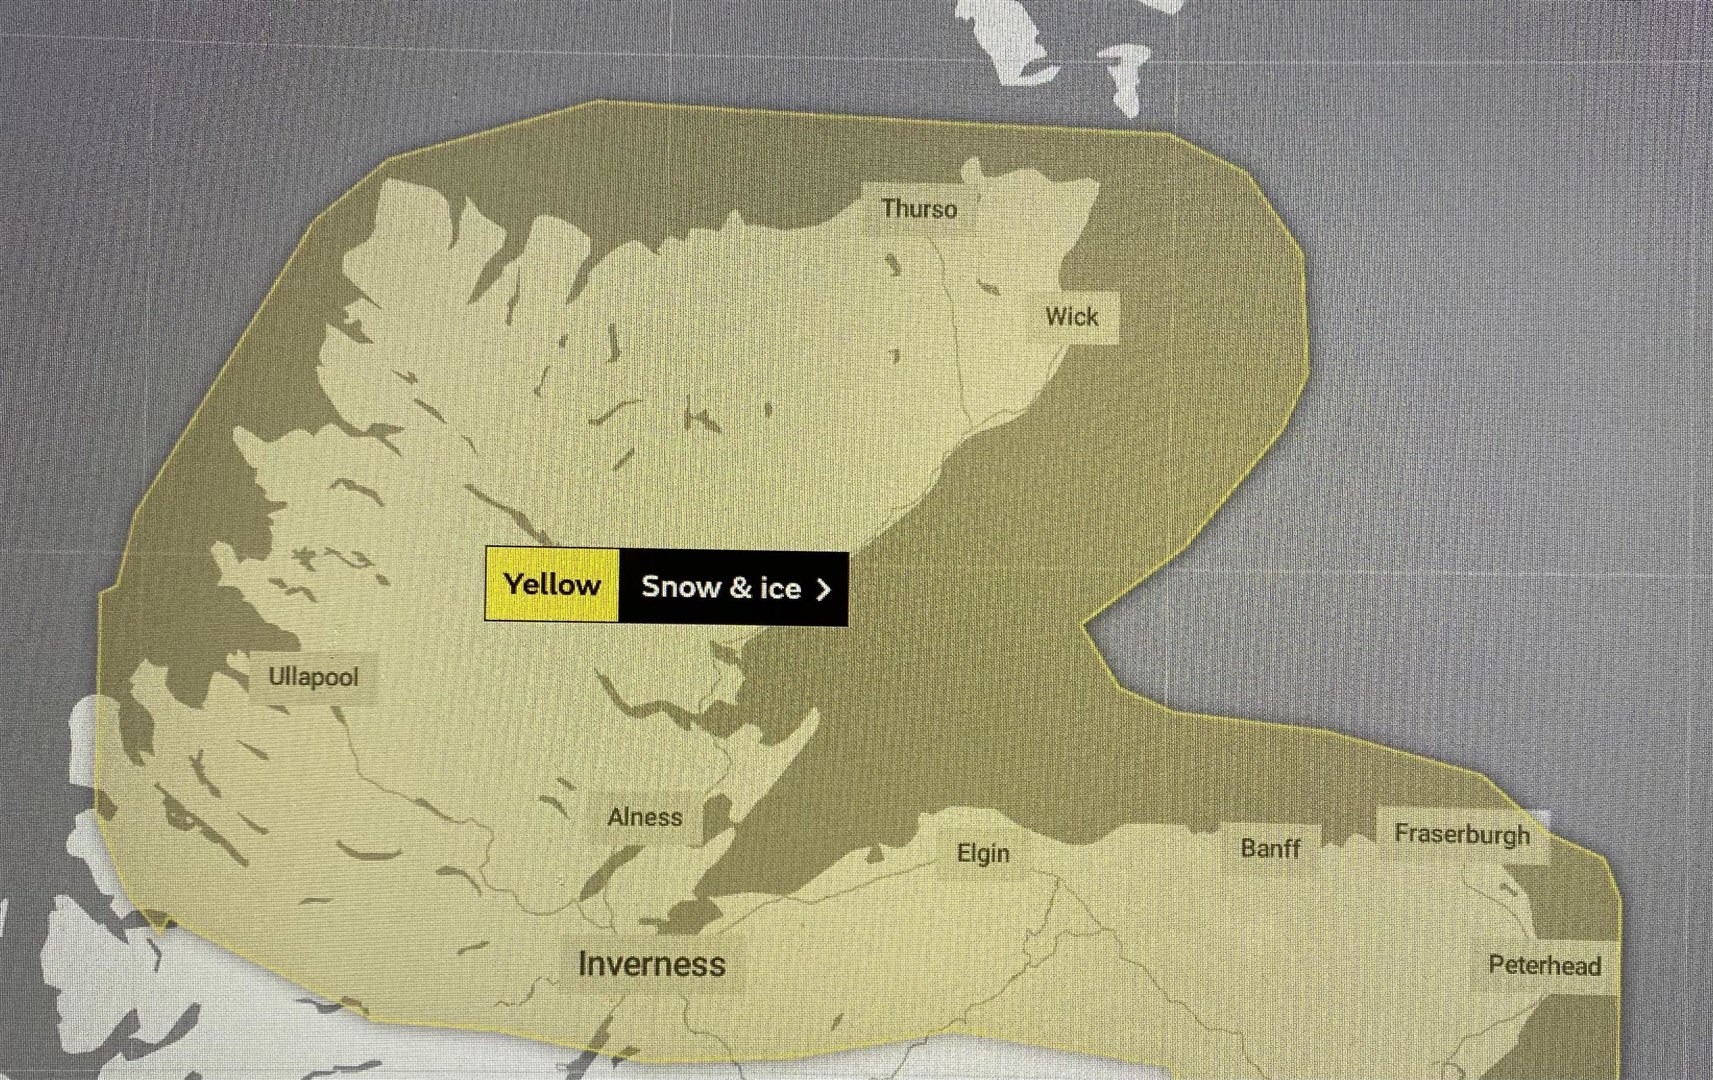 The yellow weather warning for the Highlands.